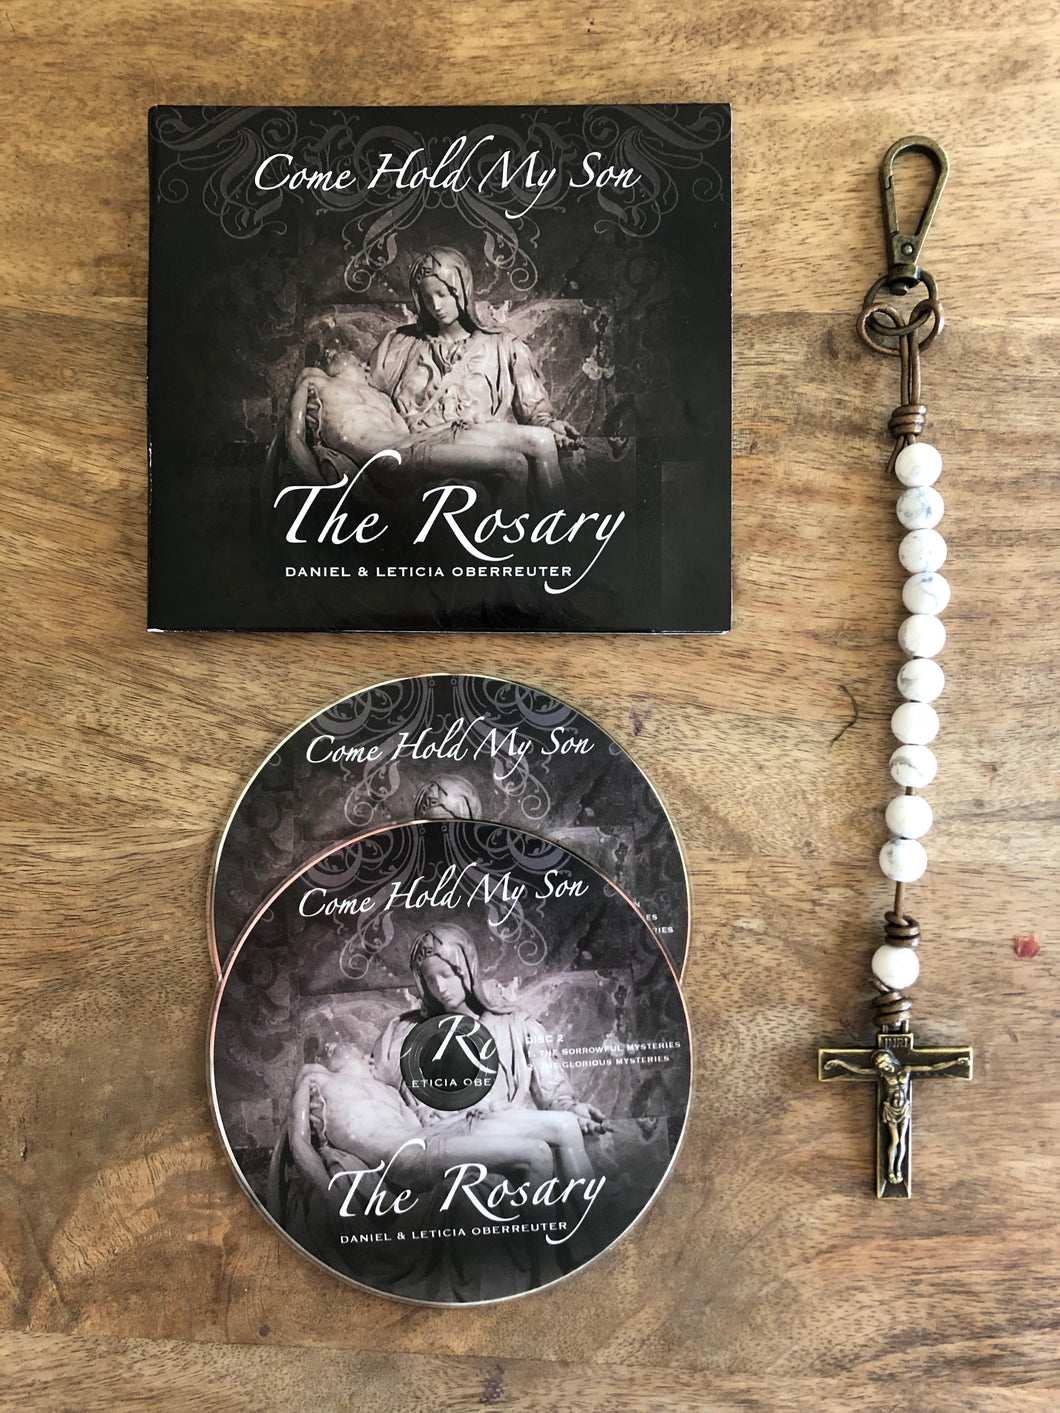 White Decade Rosary + Come Hold My Son - The Rosary Album